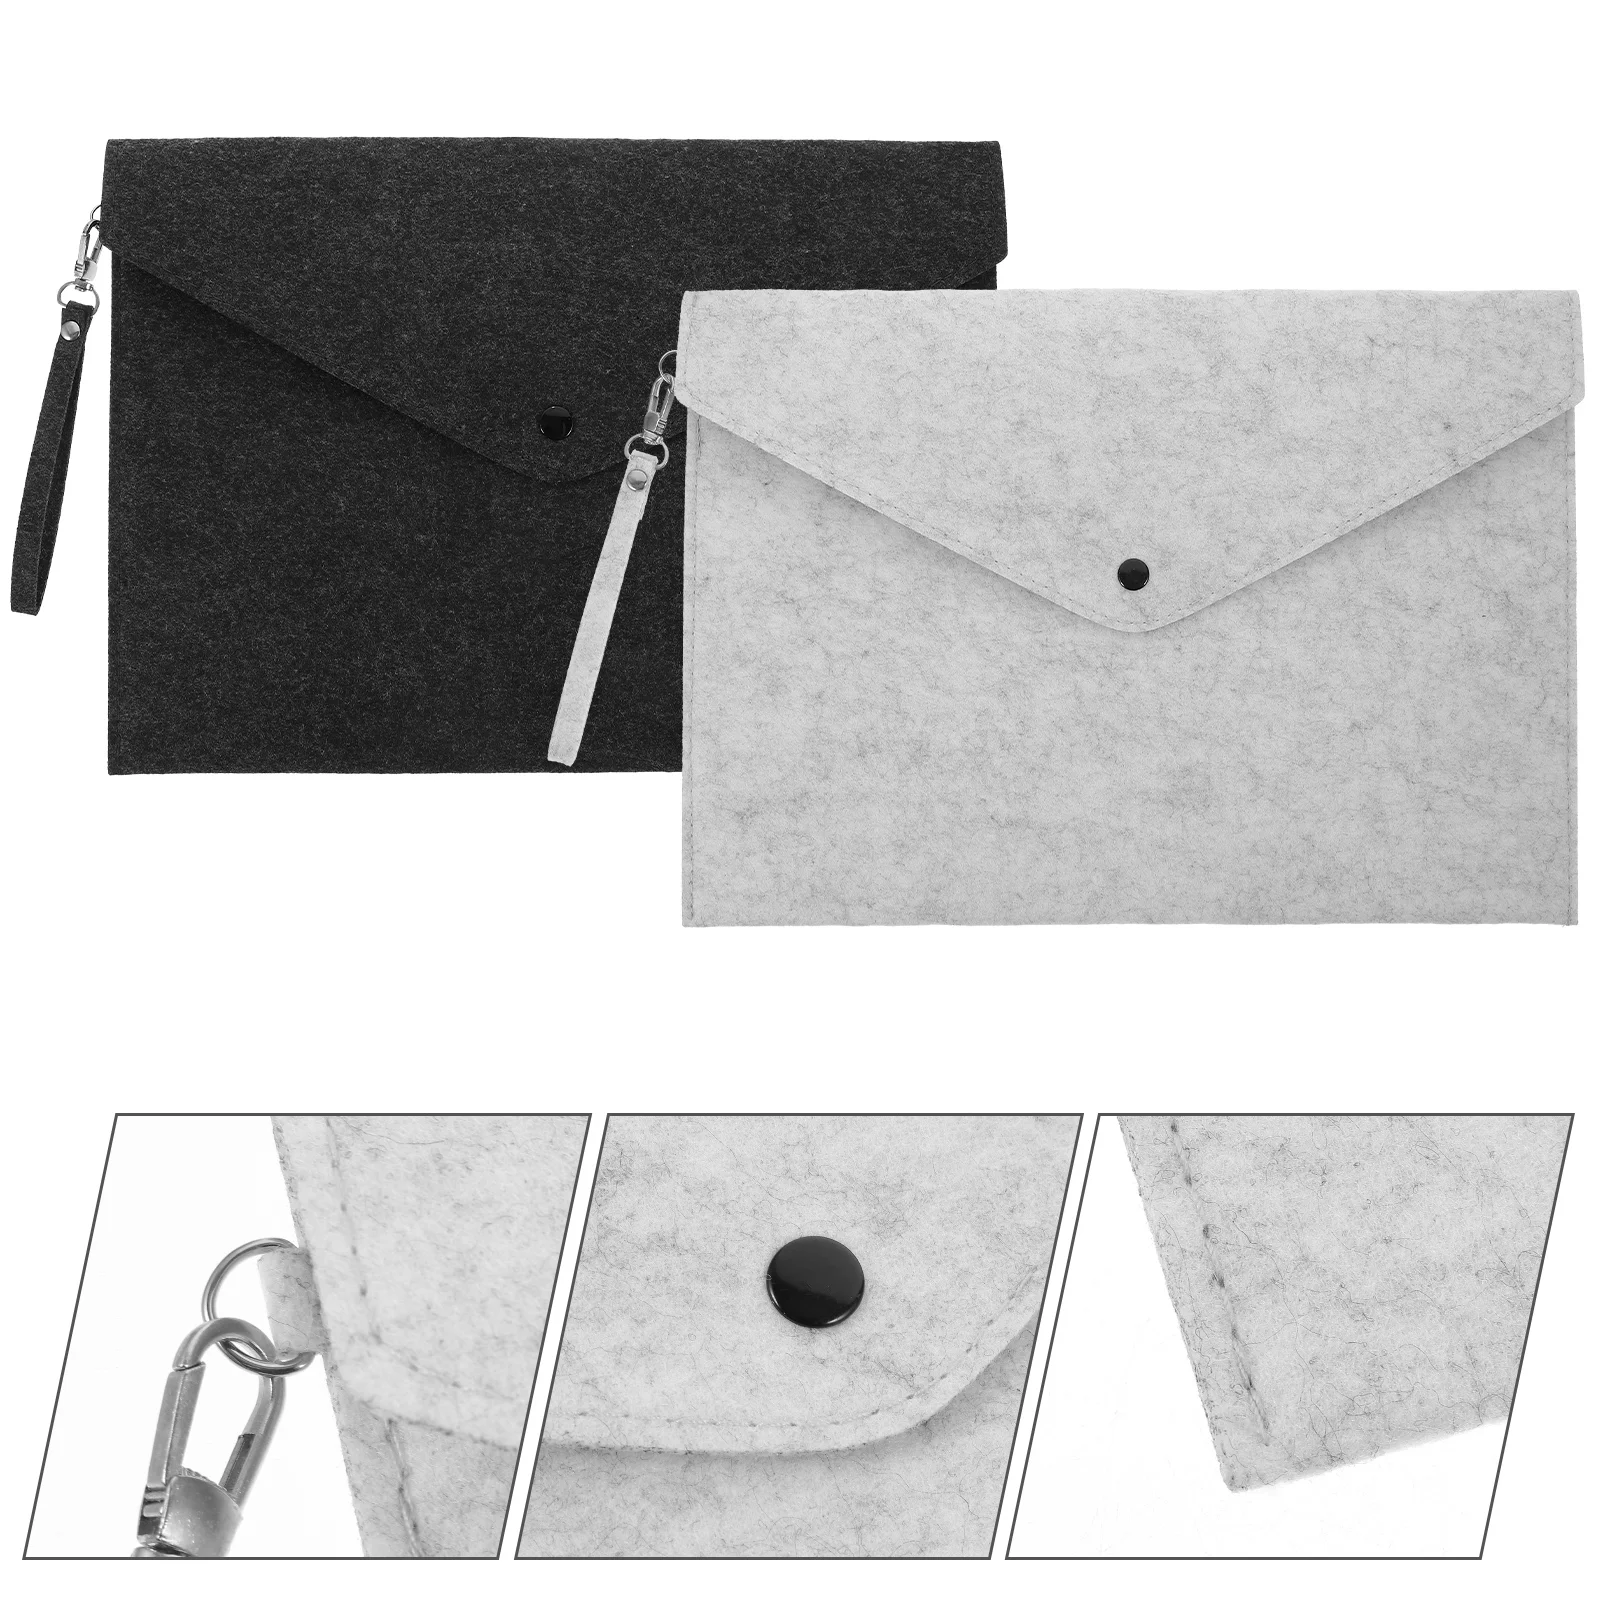 

4 Pcs Folders A4 Document Portable Felt Holder Paper Briefcase Bag with Loop Snap Type Travel